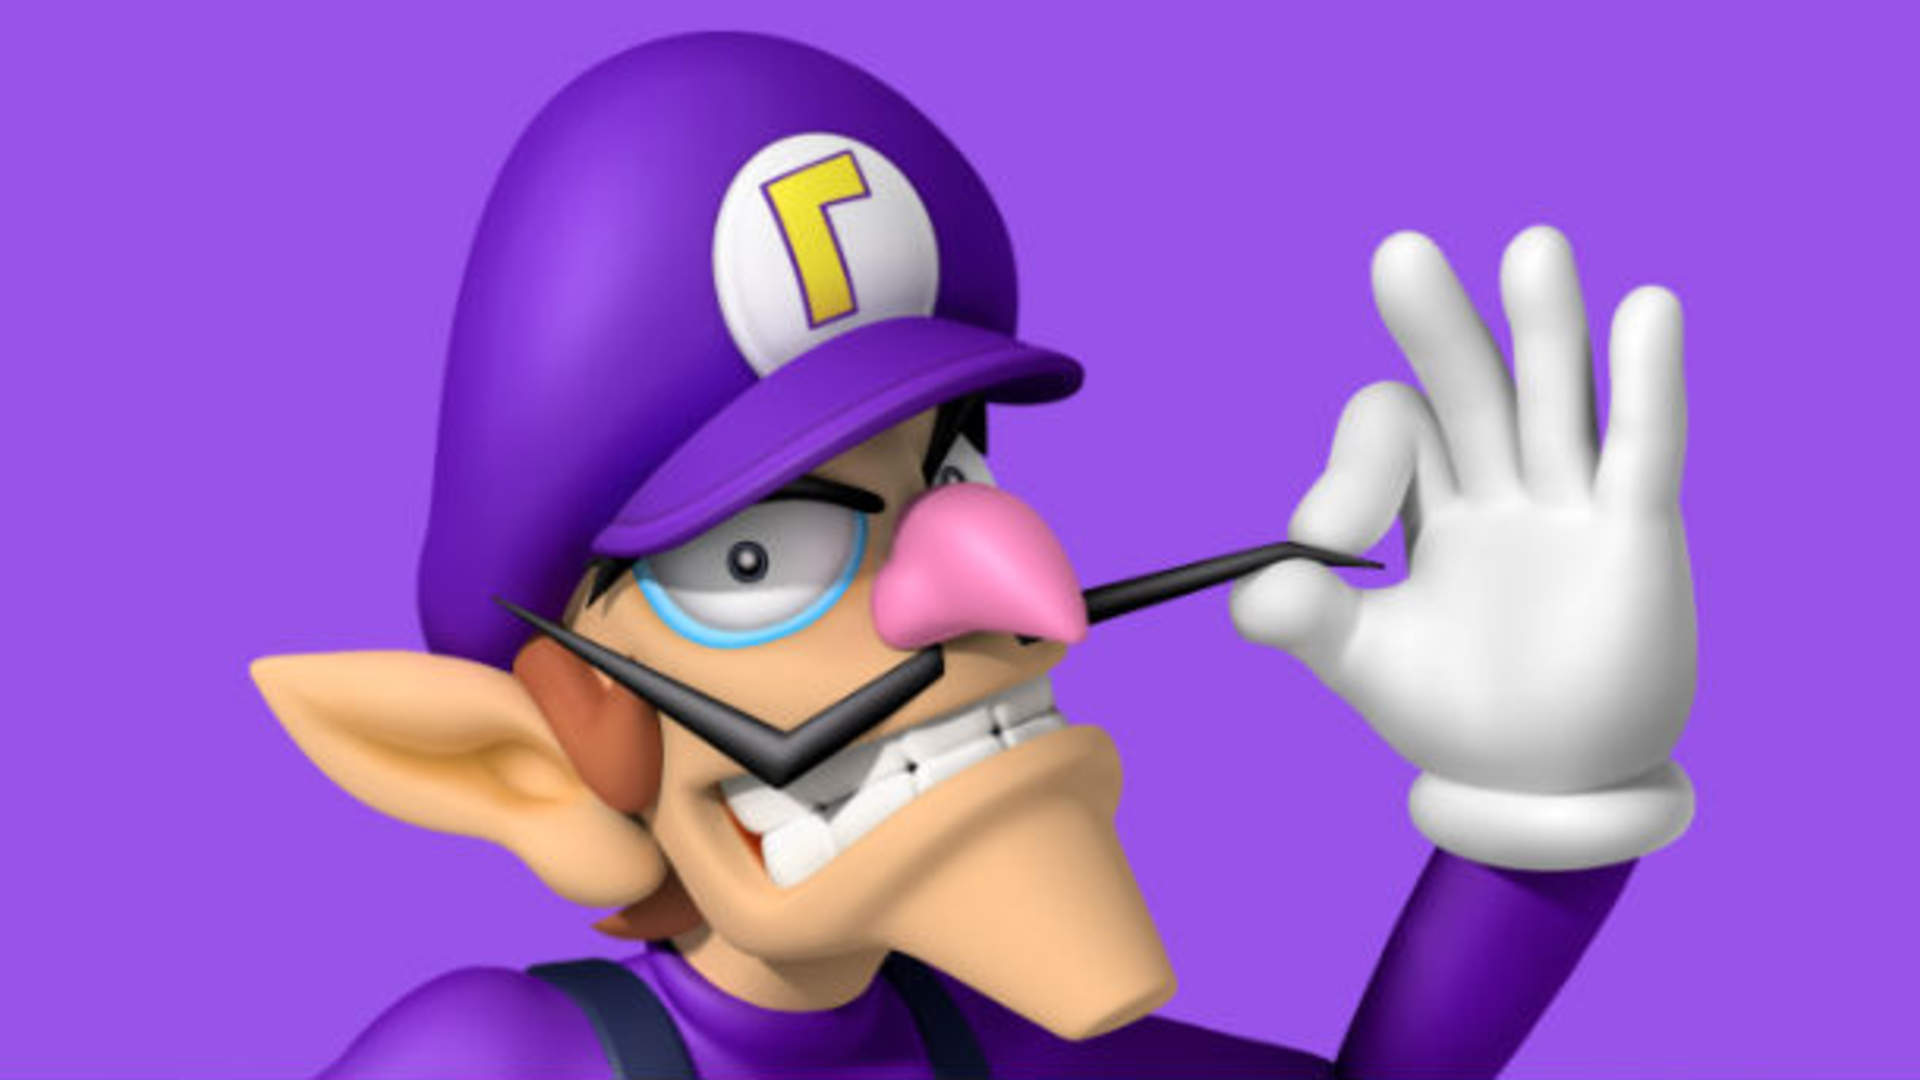 characters with foot fetishes - Waluigi